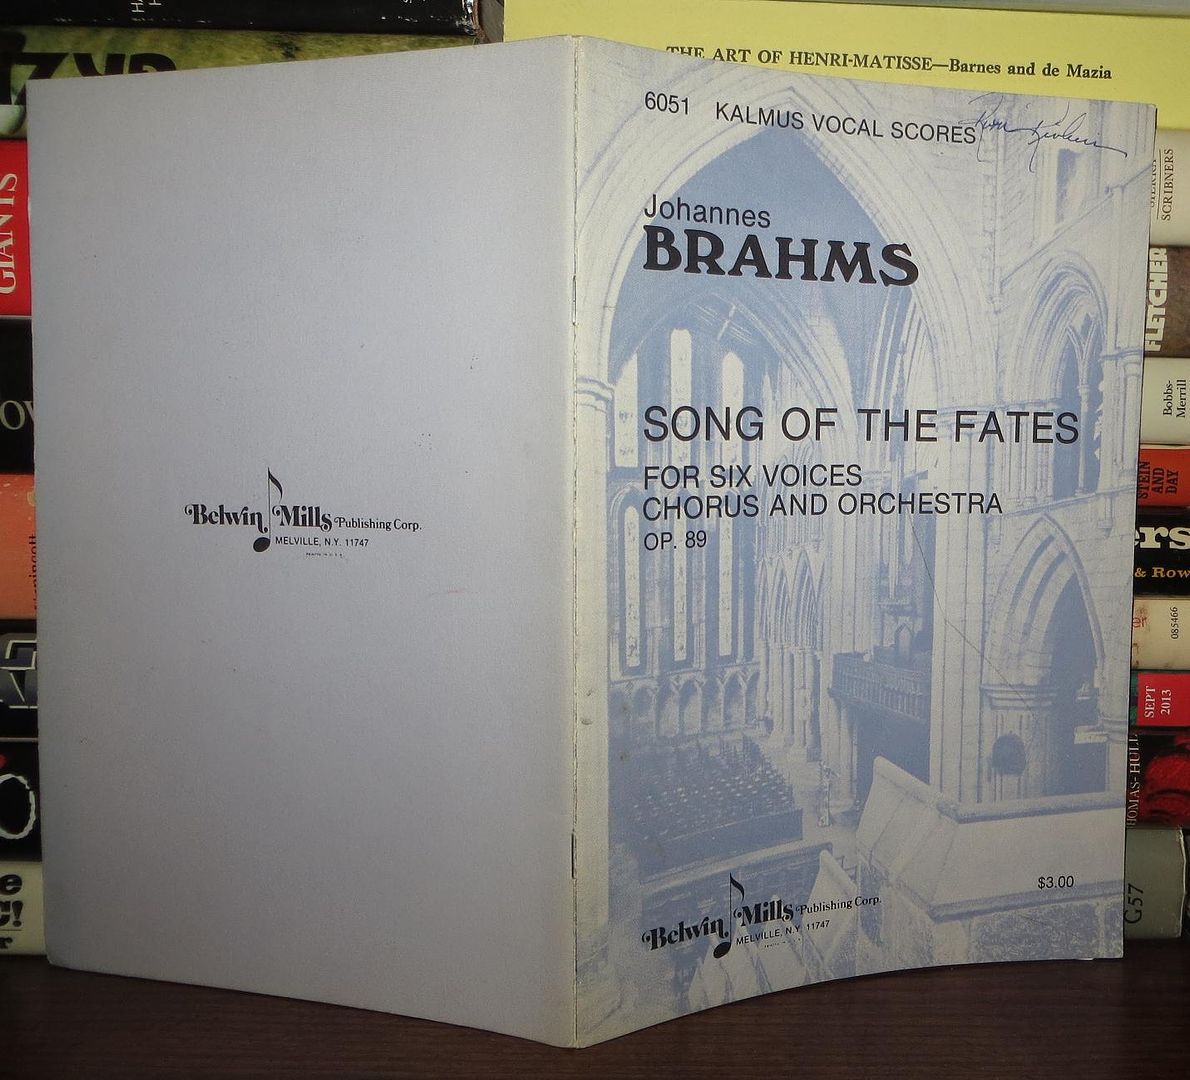 BRAHMS, JOHANNES - Song of the Fates for Six Voices